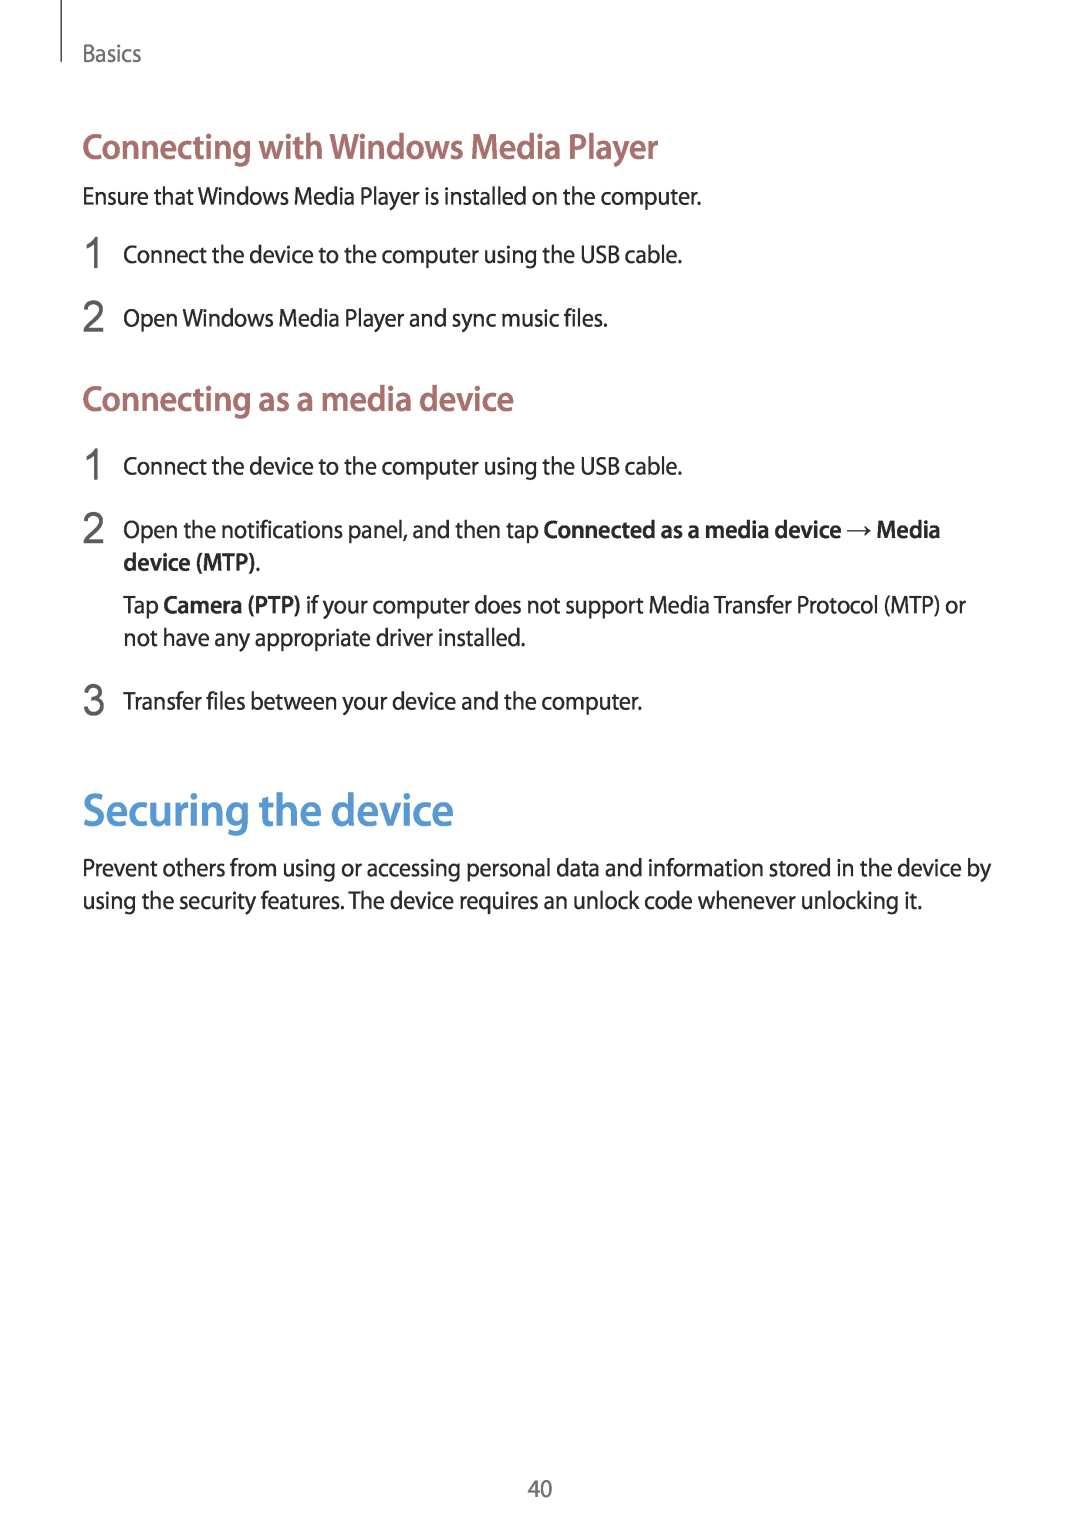 Samsung GT-I8200RWNORX Securing the device, Connecting with Windows Media Player, Connecting as a media device, device MTP 